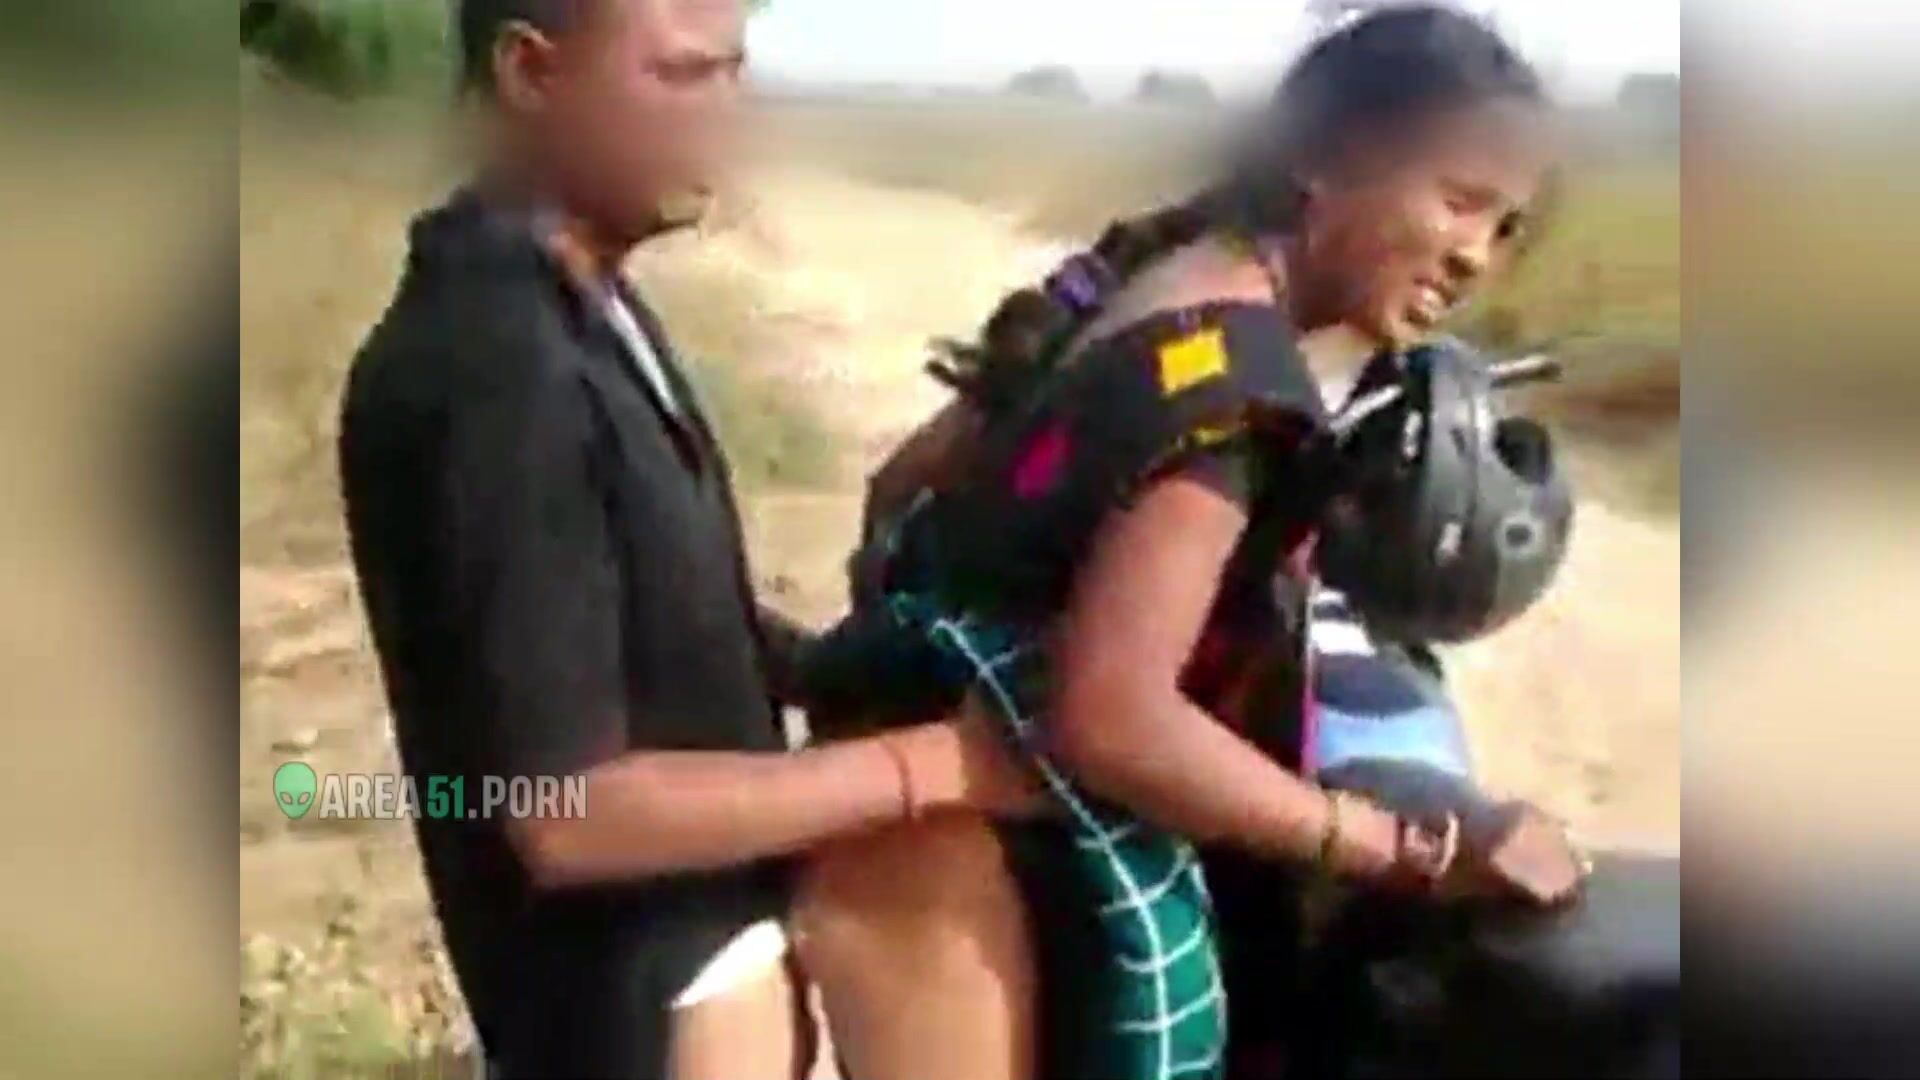 Bihar Local Village Xxx Mother - Indian Bhabhi fucking on motorcycle with village local guy | AREA51.PORN